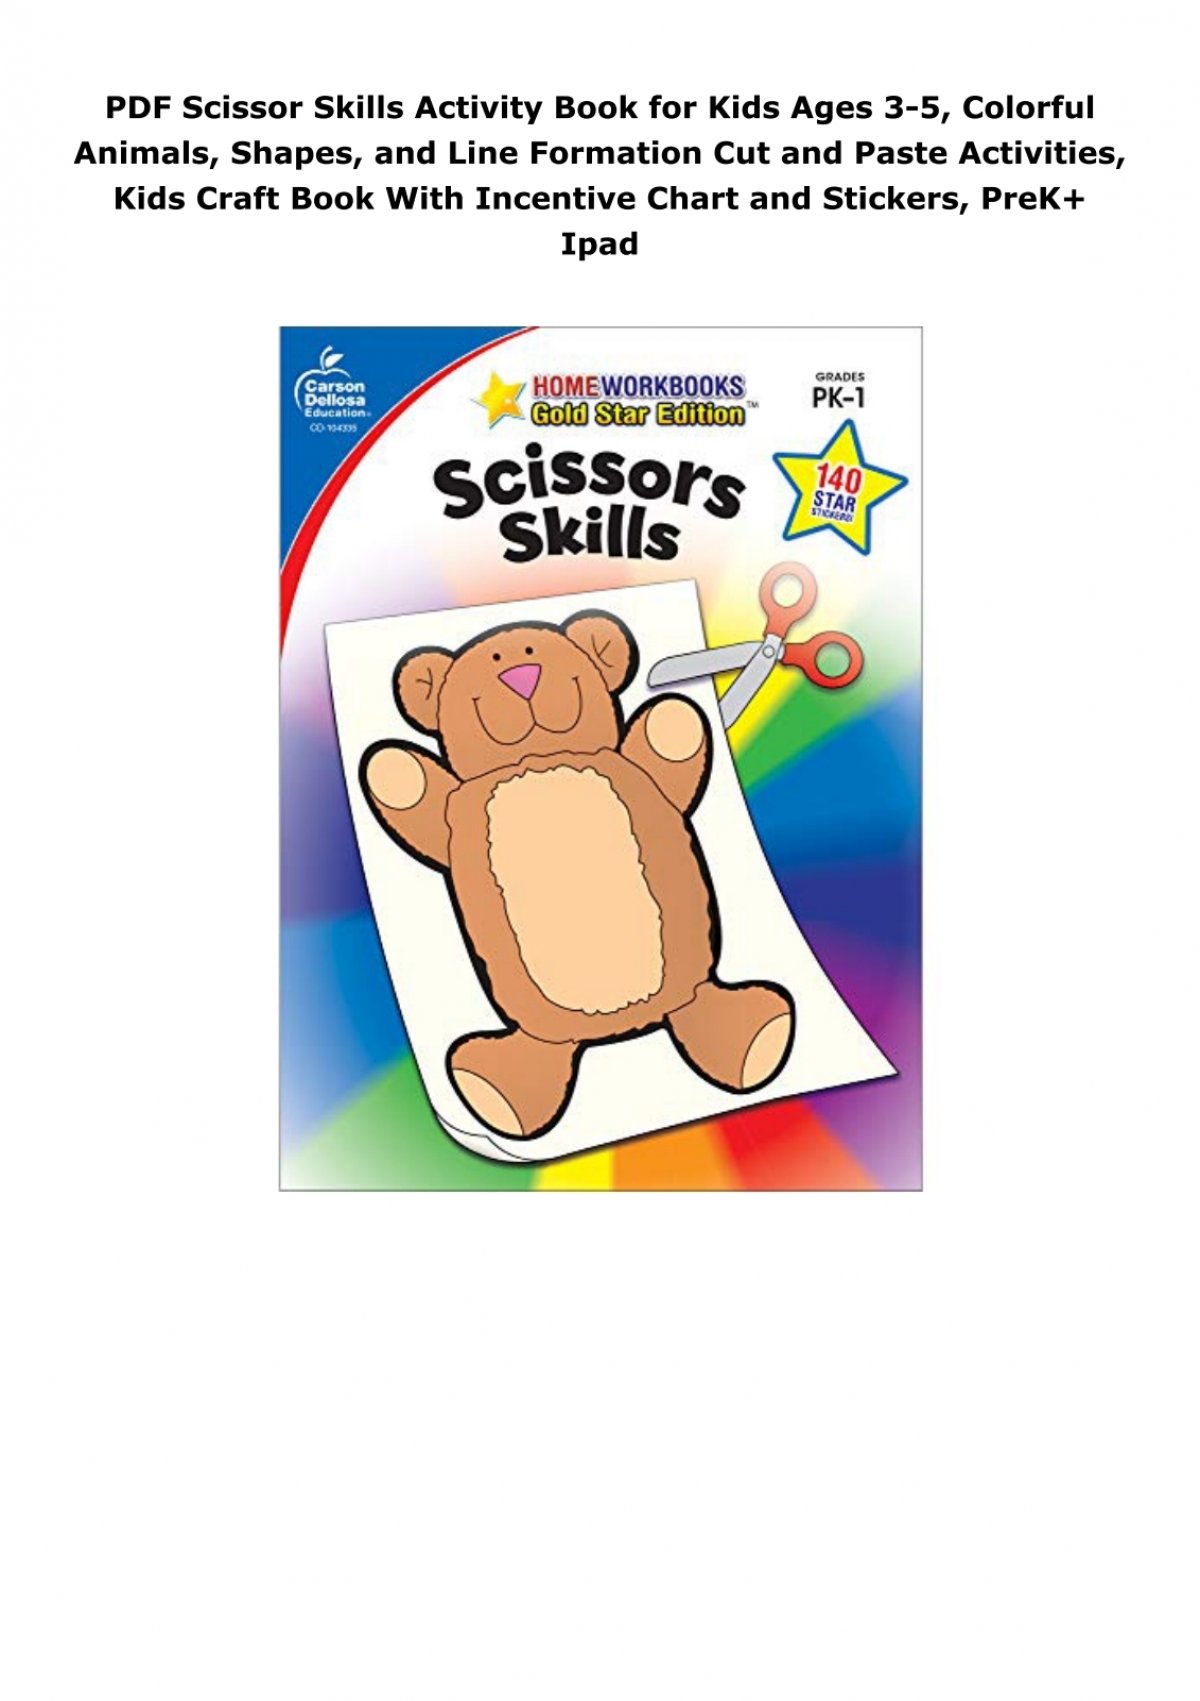 Carson Dellosa Scissor Skills Activity Book for Kids Ages 3-5, Colorful  Animals, Shapes, and Line Formation Cut and Paste Activities, Kids Craft  Book With Incentive Chart and Stickers, PreK+